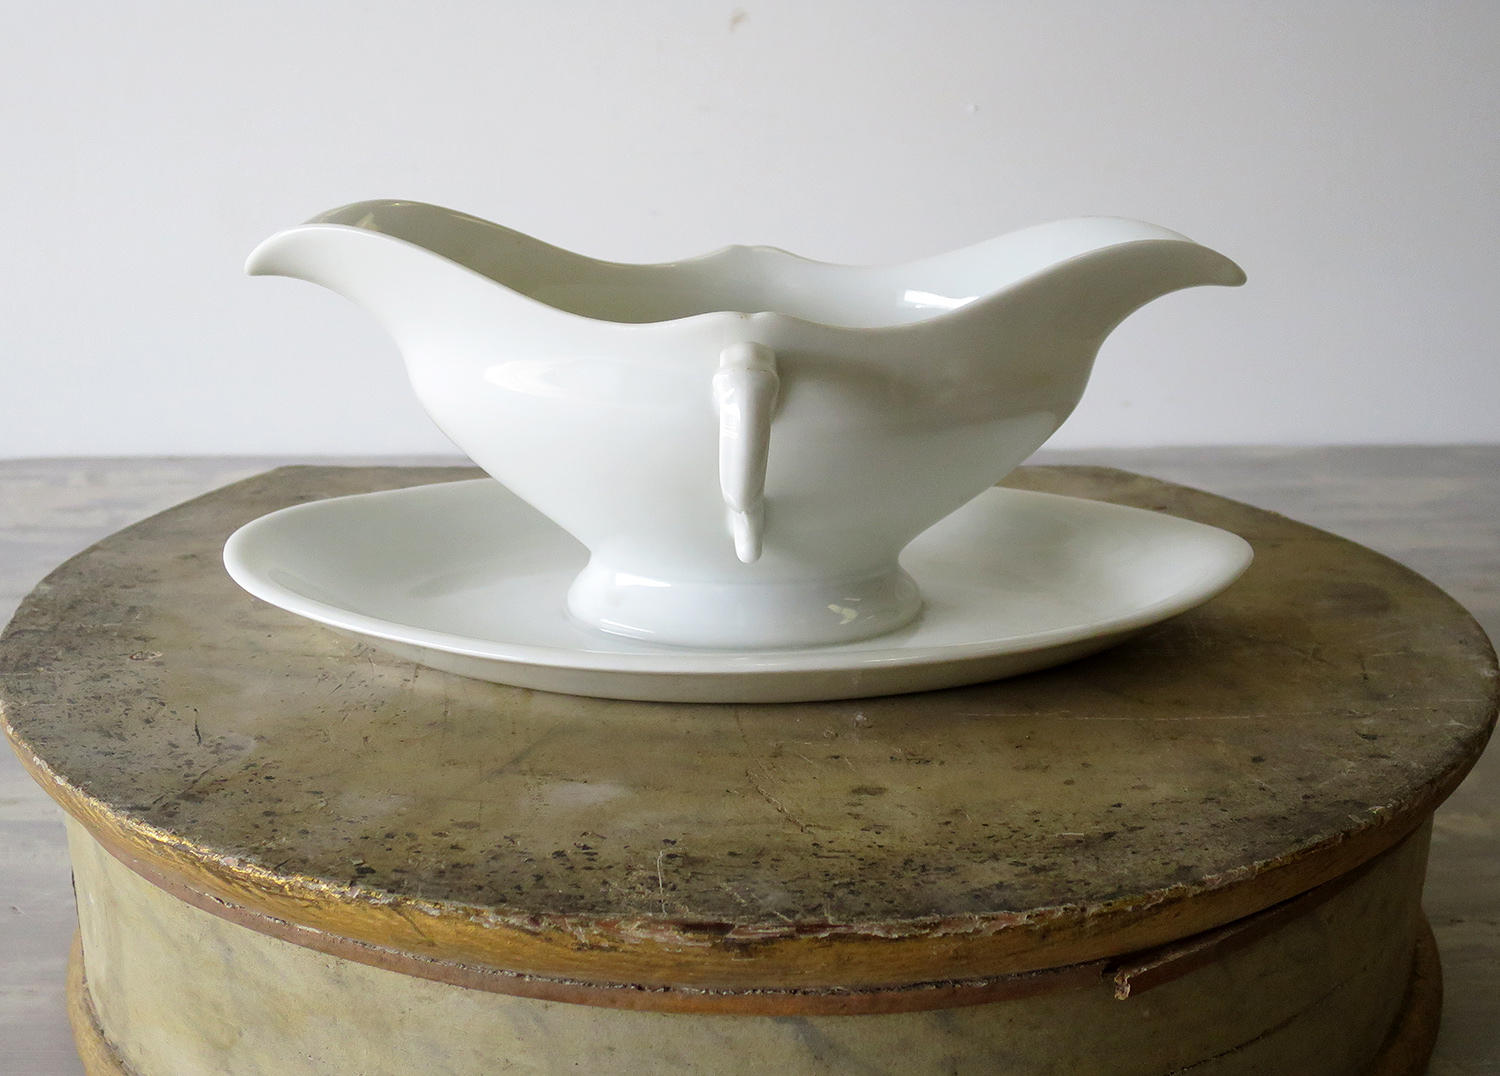 19th century French white Porcelain Sauce Boat